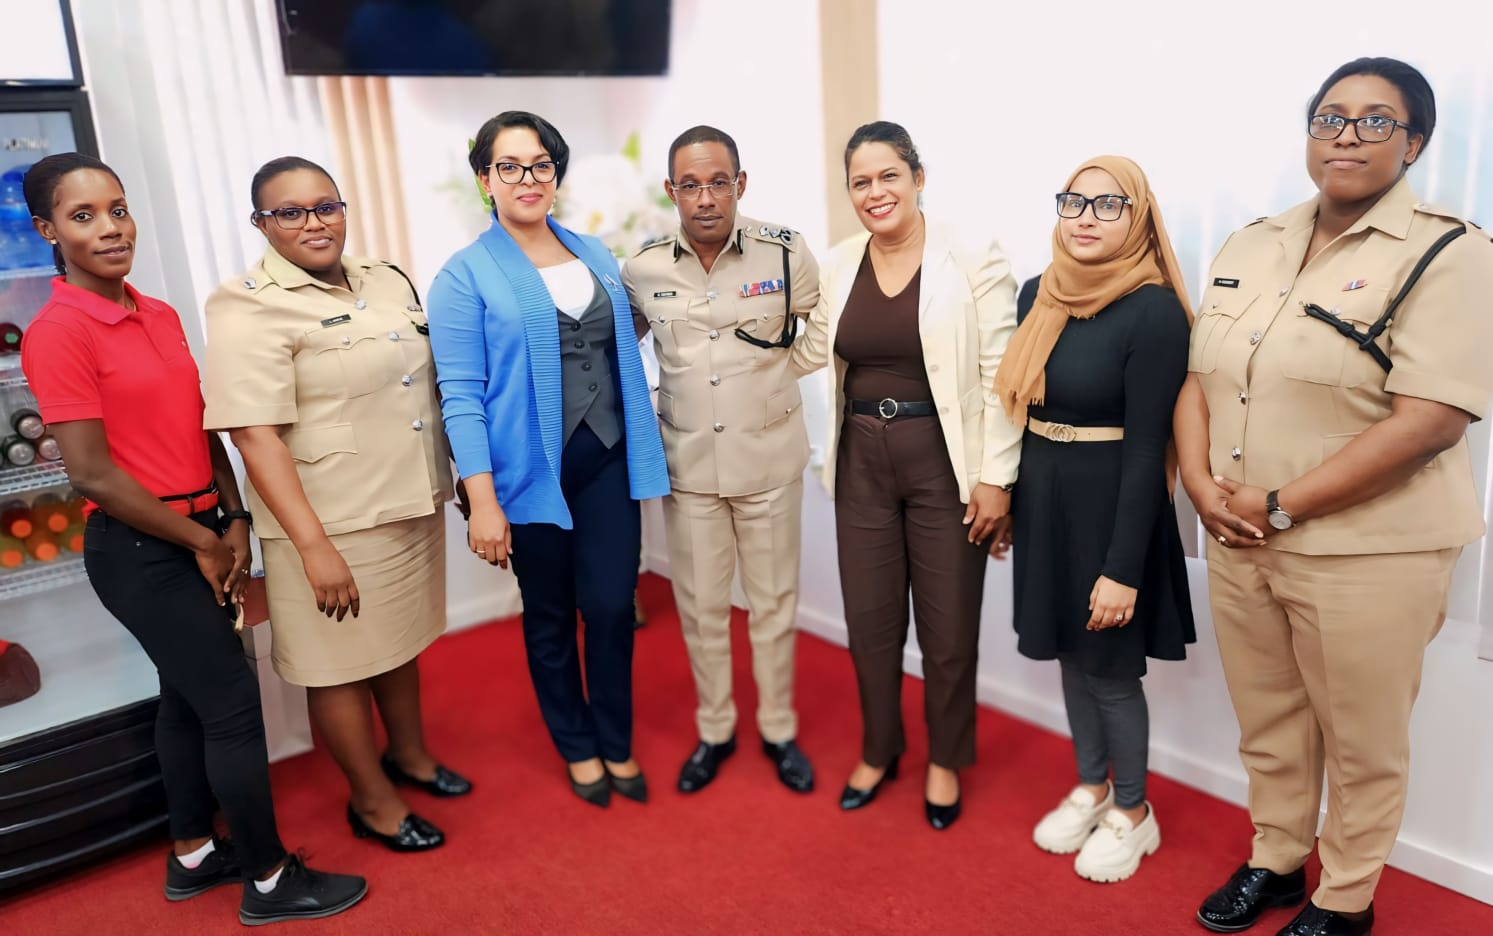 GCCI to collaborate with stakeholders to host 2nd annual Women in Law Enforcement Summit